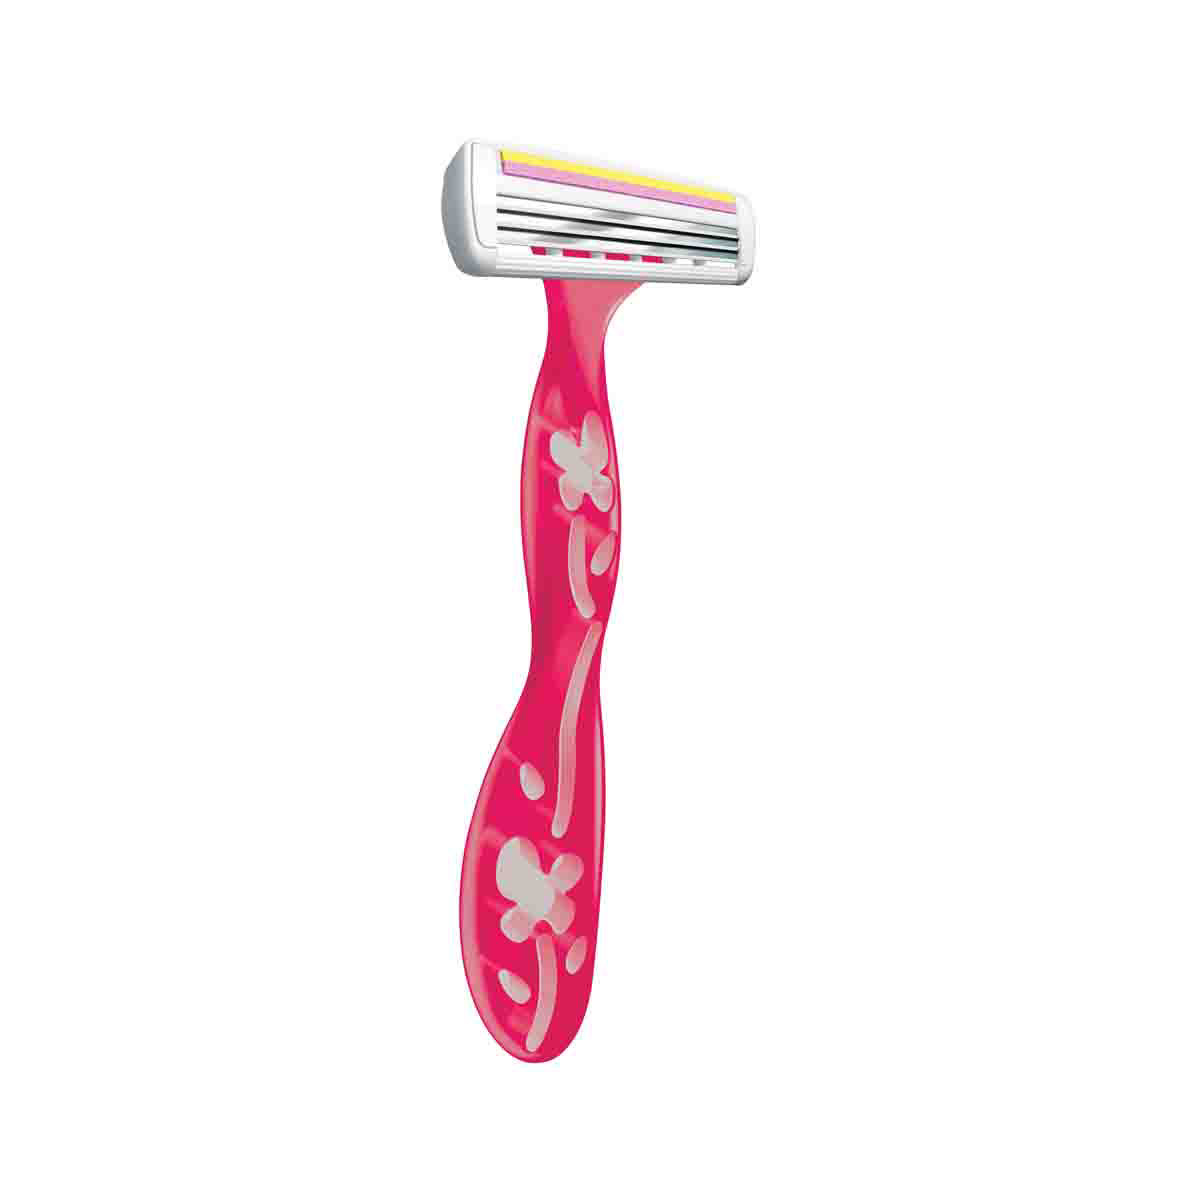 BIC Soleil Simply Smooth Women's Disposable Razor, 3 Pack